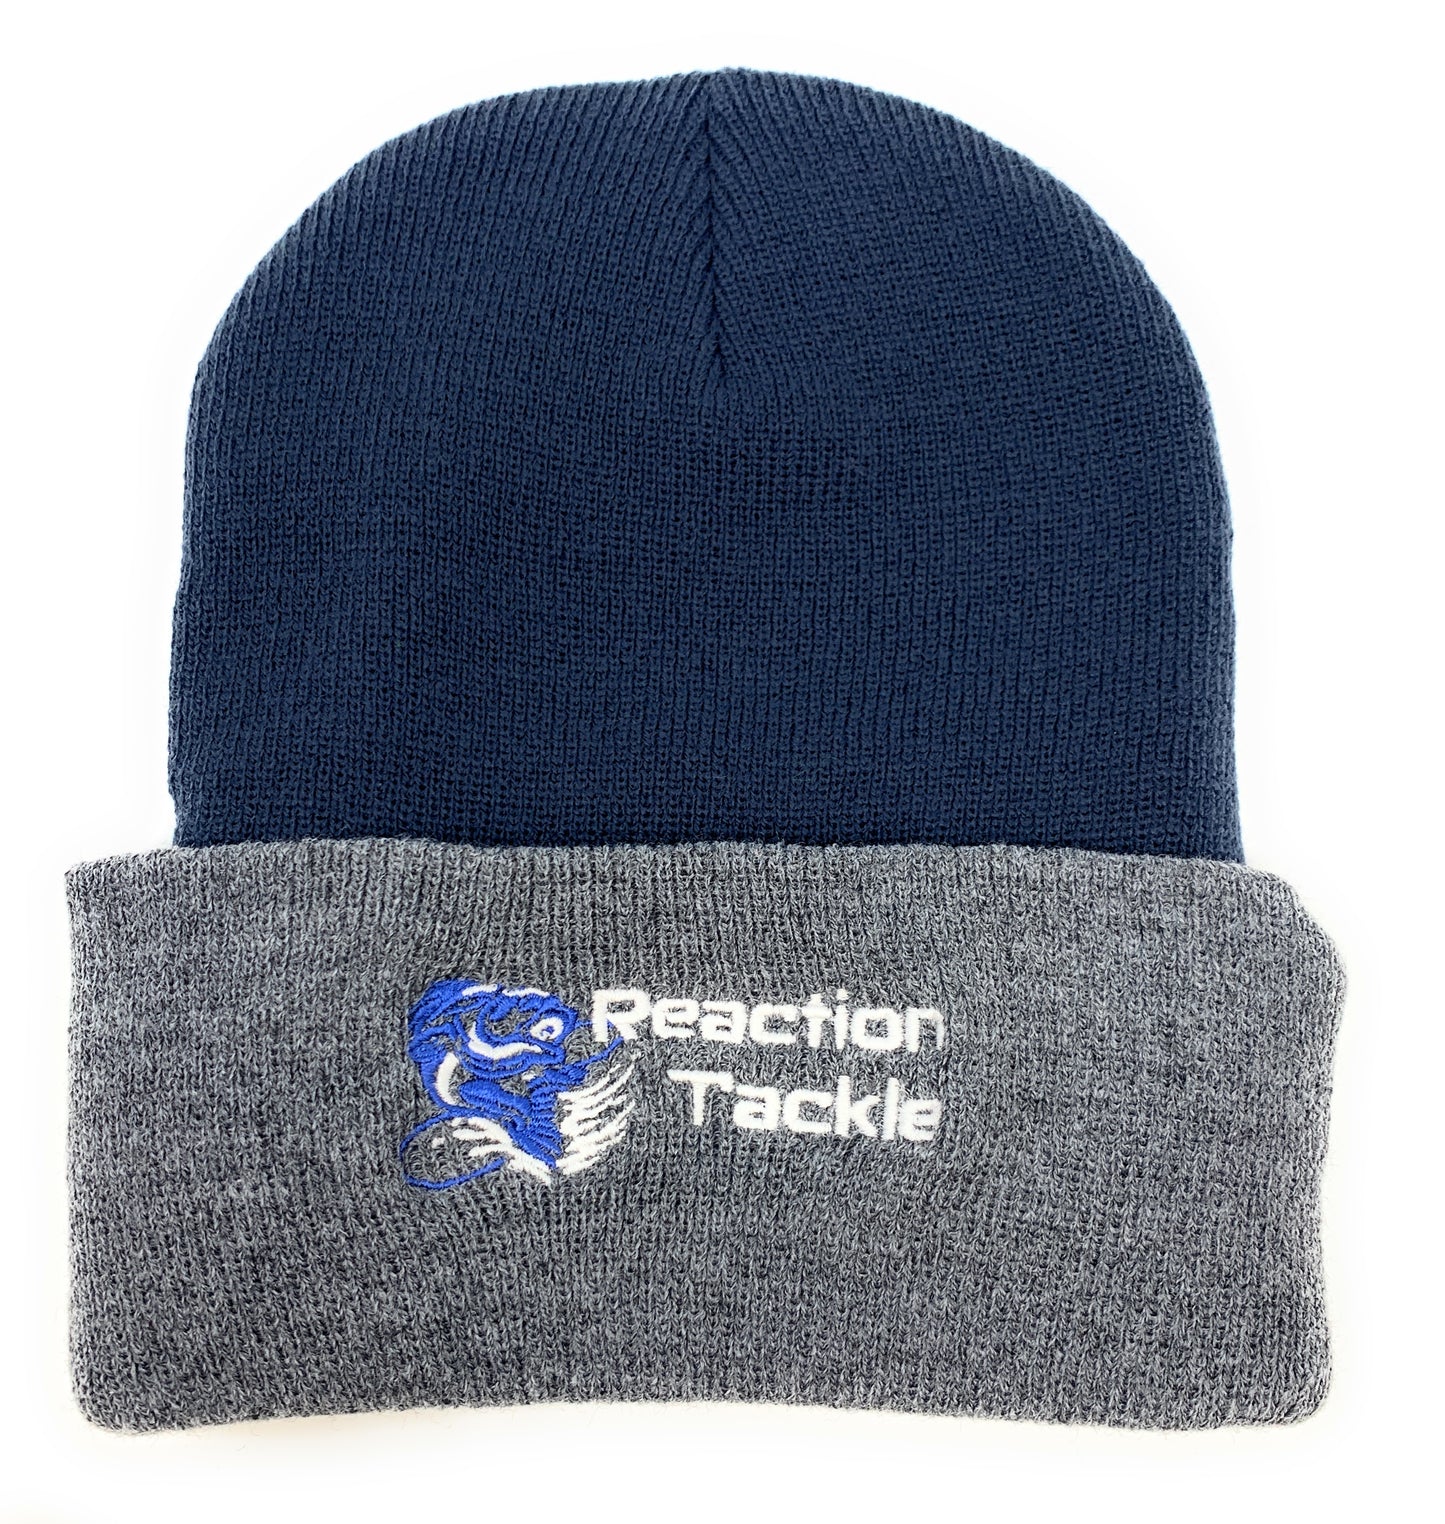 Reaction Tackle Knit Beanie Hats